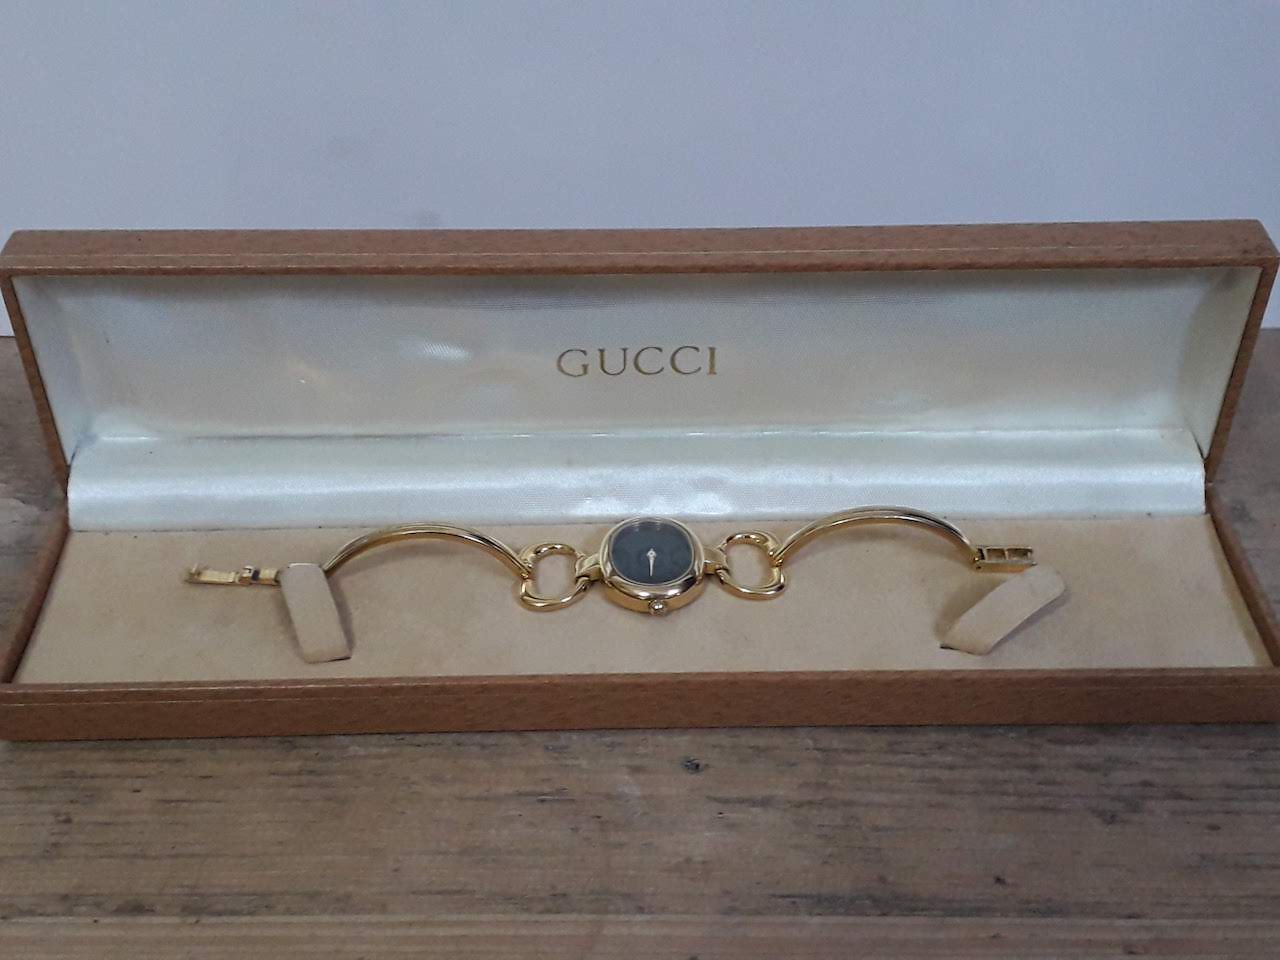 A ladies gold plated Gucci wristwatch with box.